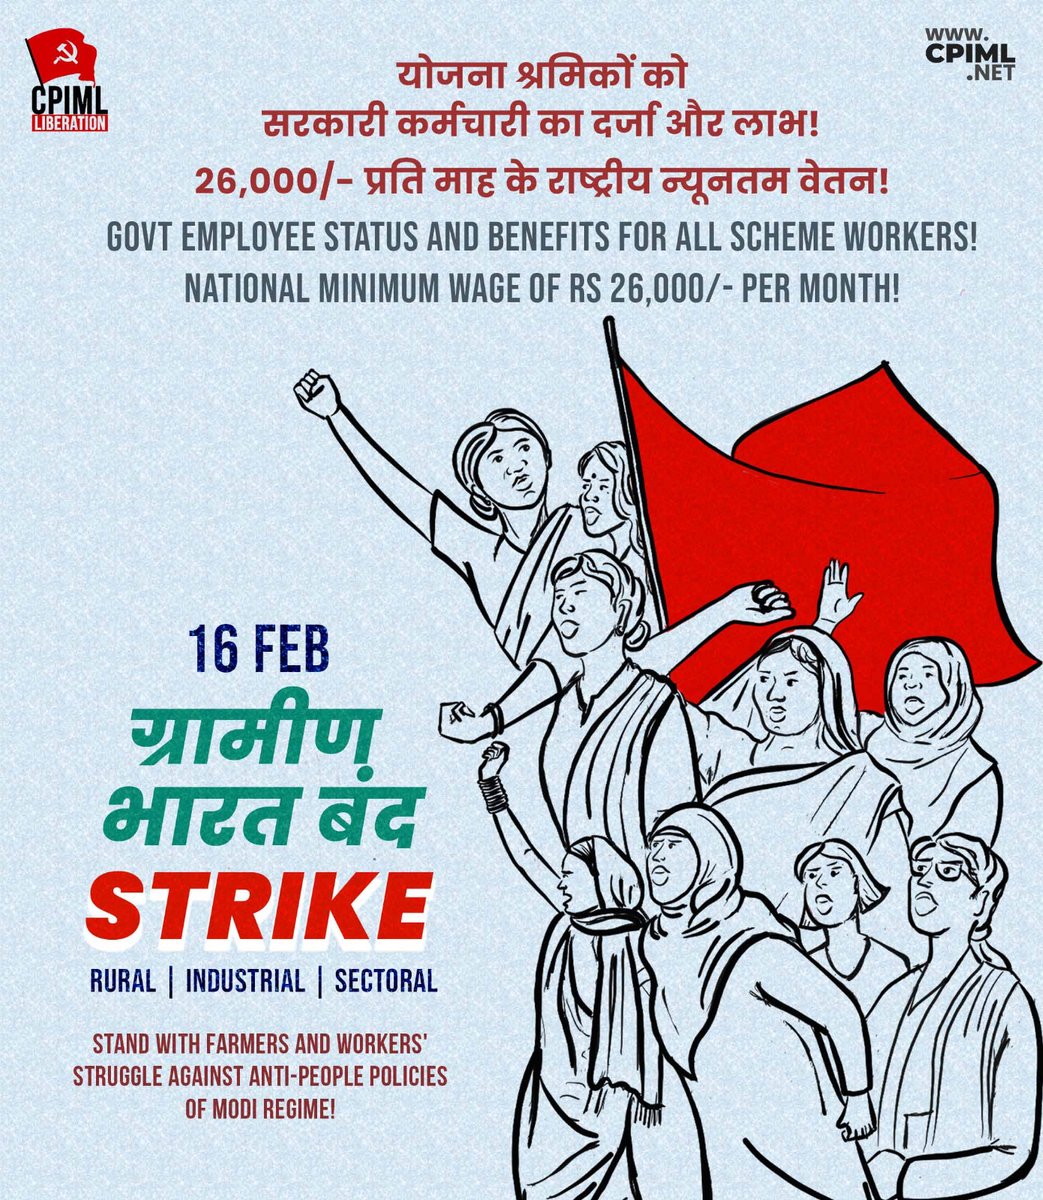 Today, millions of people across India are joining a day's industrial and rural strike at the call of trade unions & farmers' organisations! Stand with the farmers! Stand with the workers! #FarmersProtest2024  #BharatBandh #strike 
No to the #Modi regime's  #HindutvaFascism!